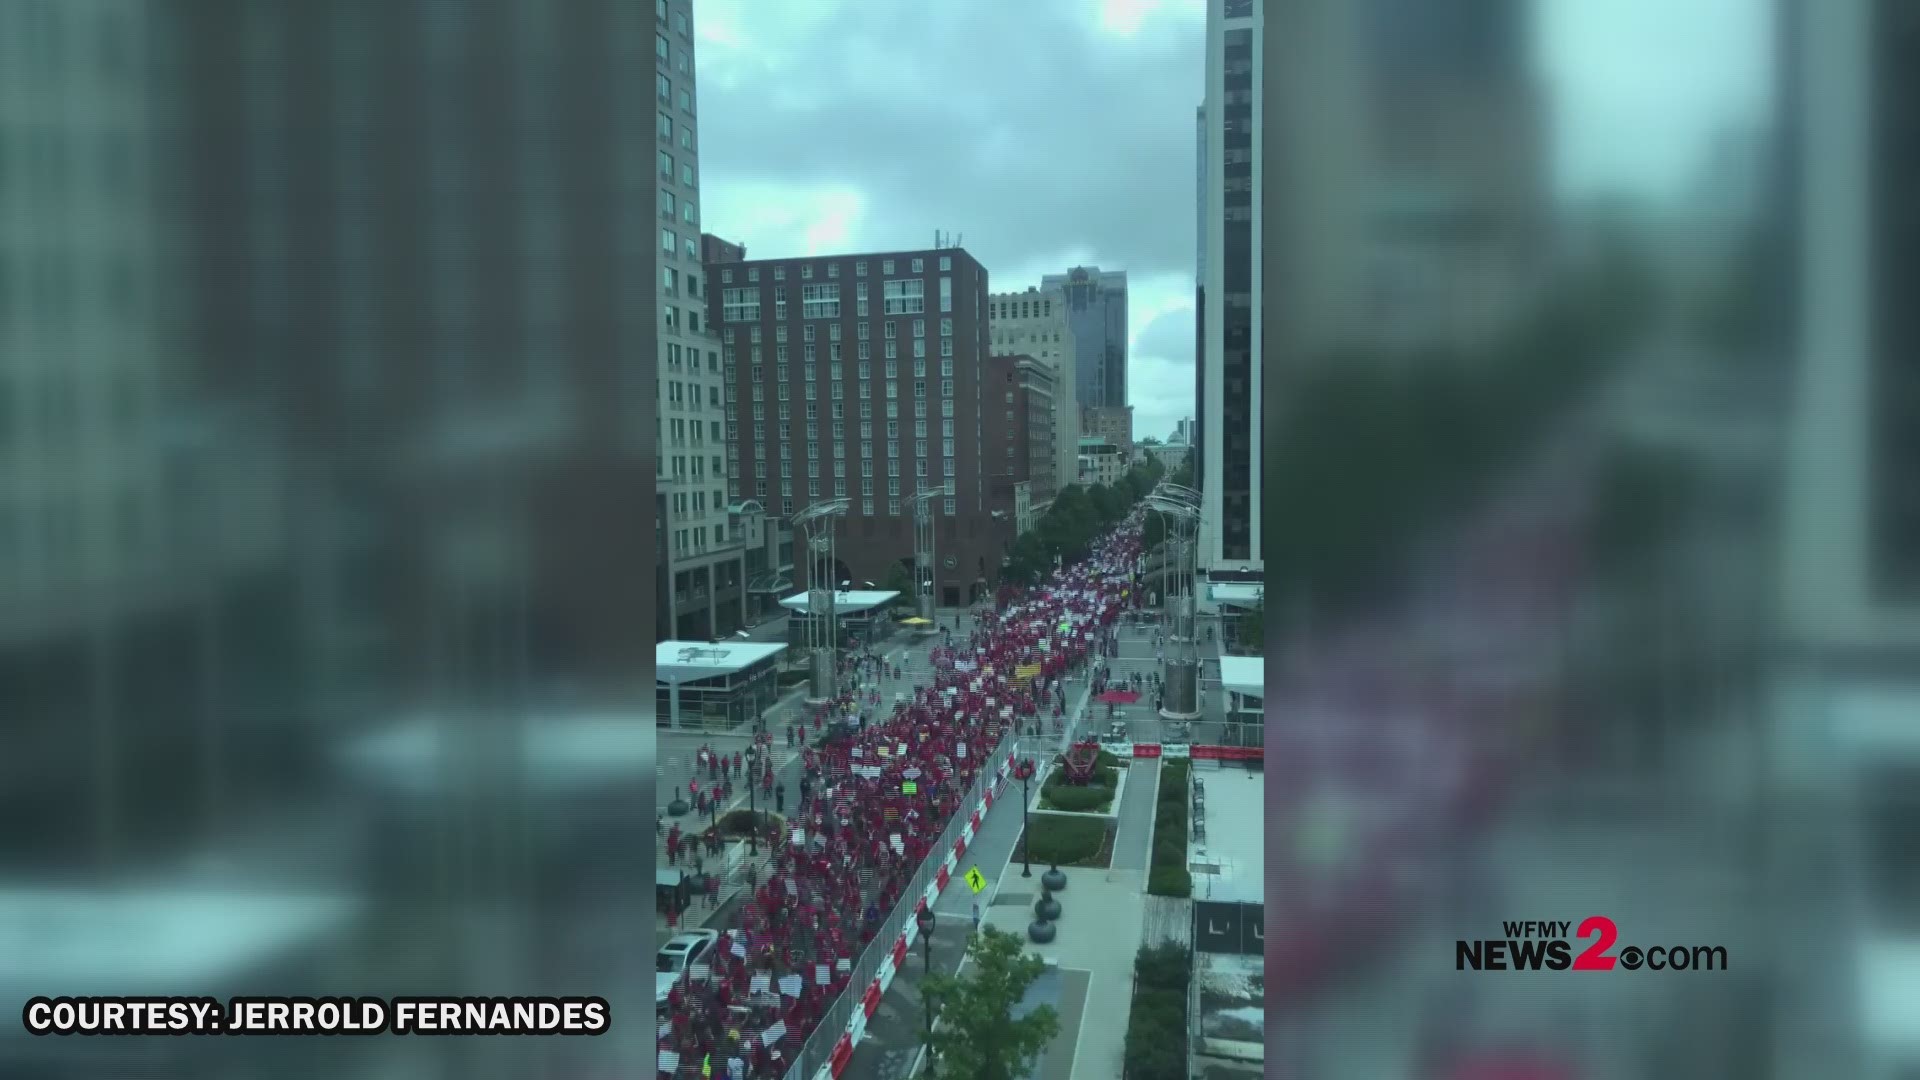 Check it out! A timelapse of the teacher rally in Raleigh